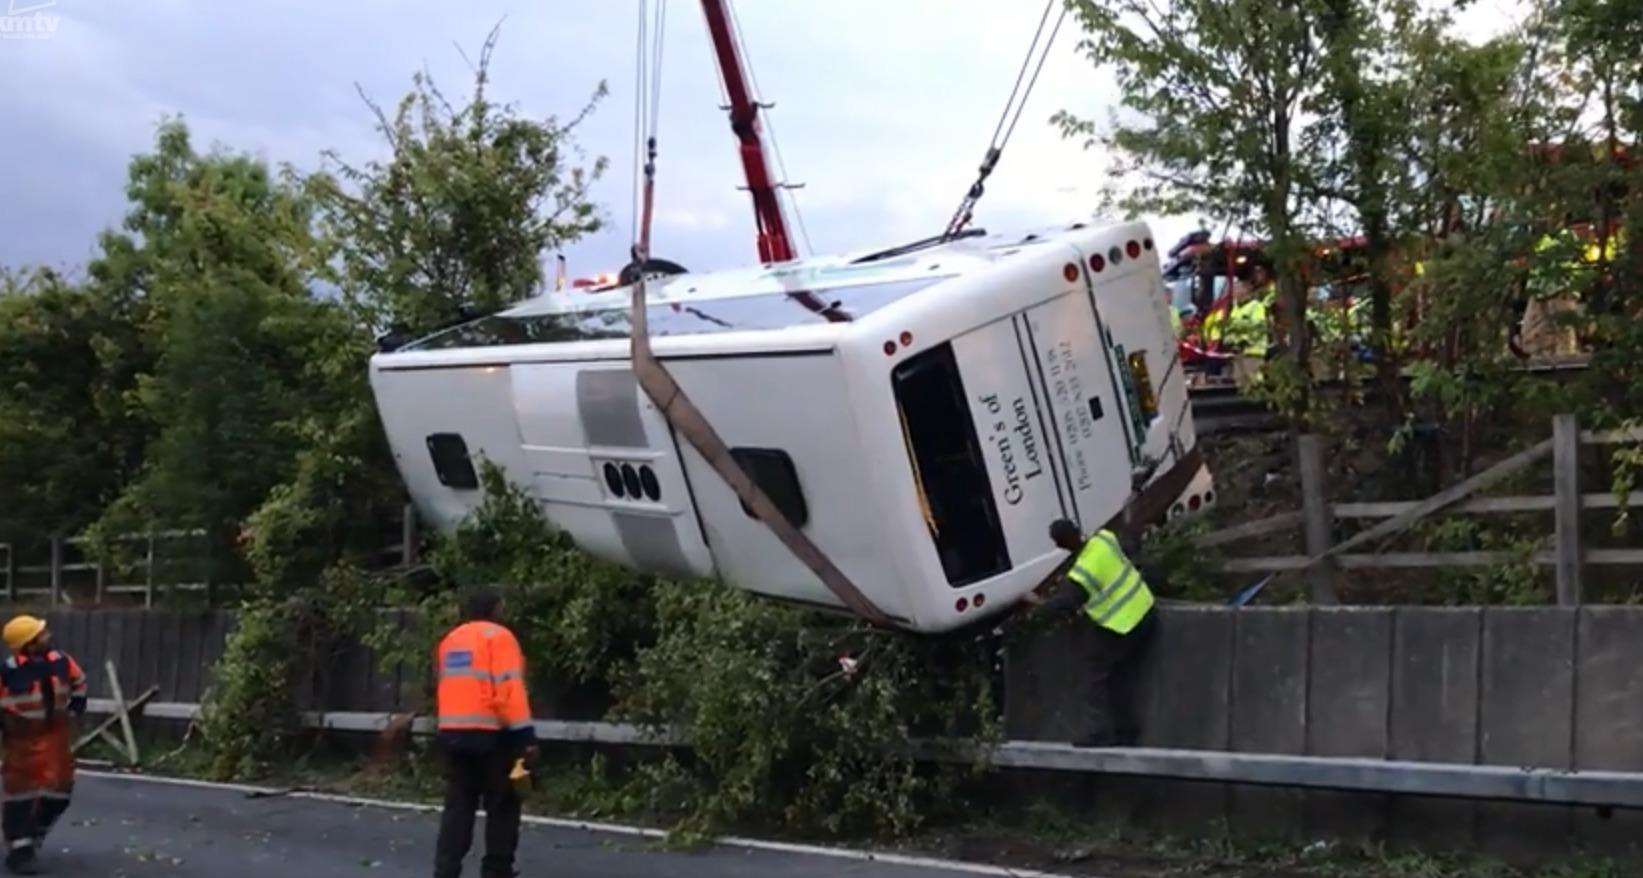 Work to recover the overturned coach